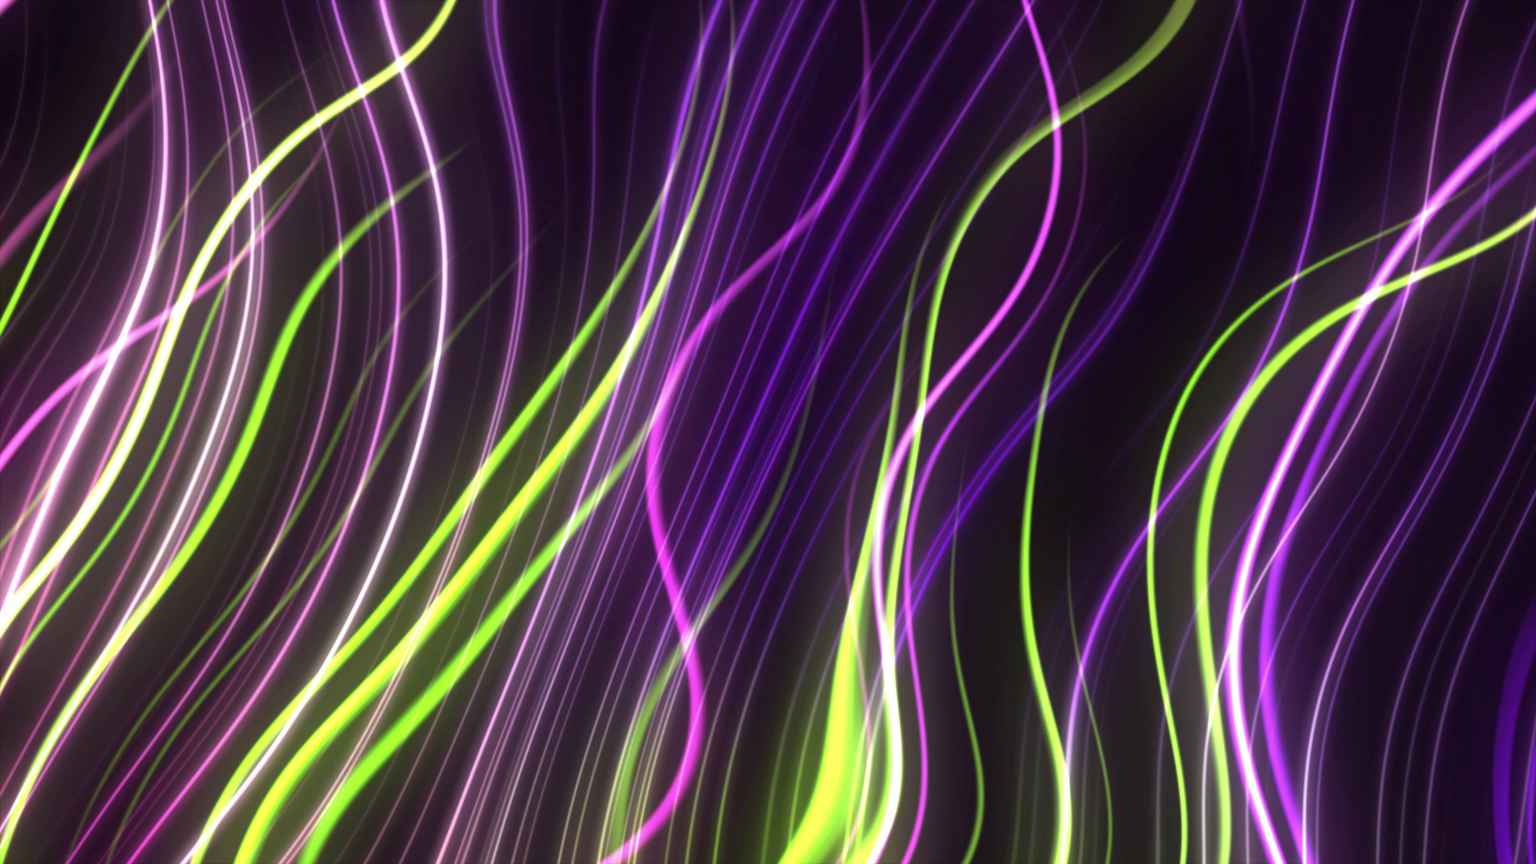 4K Purple & Lime Wavy Motion Background || VFX Free To Use 4K Screensaver || FREE DOWNLOAD